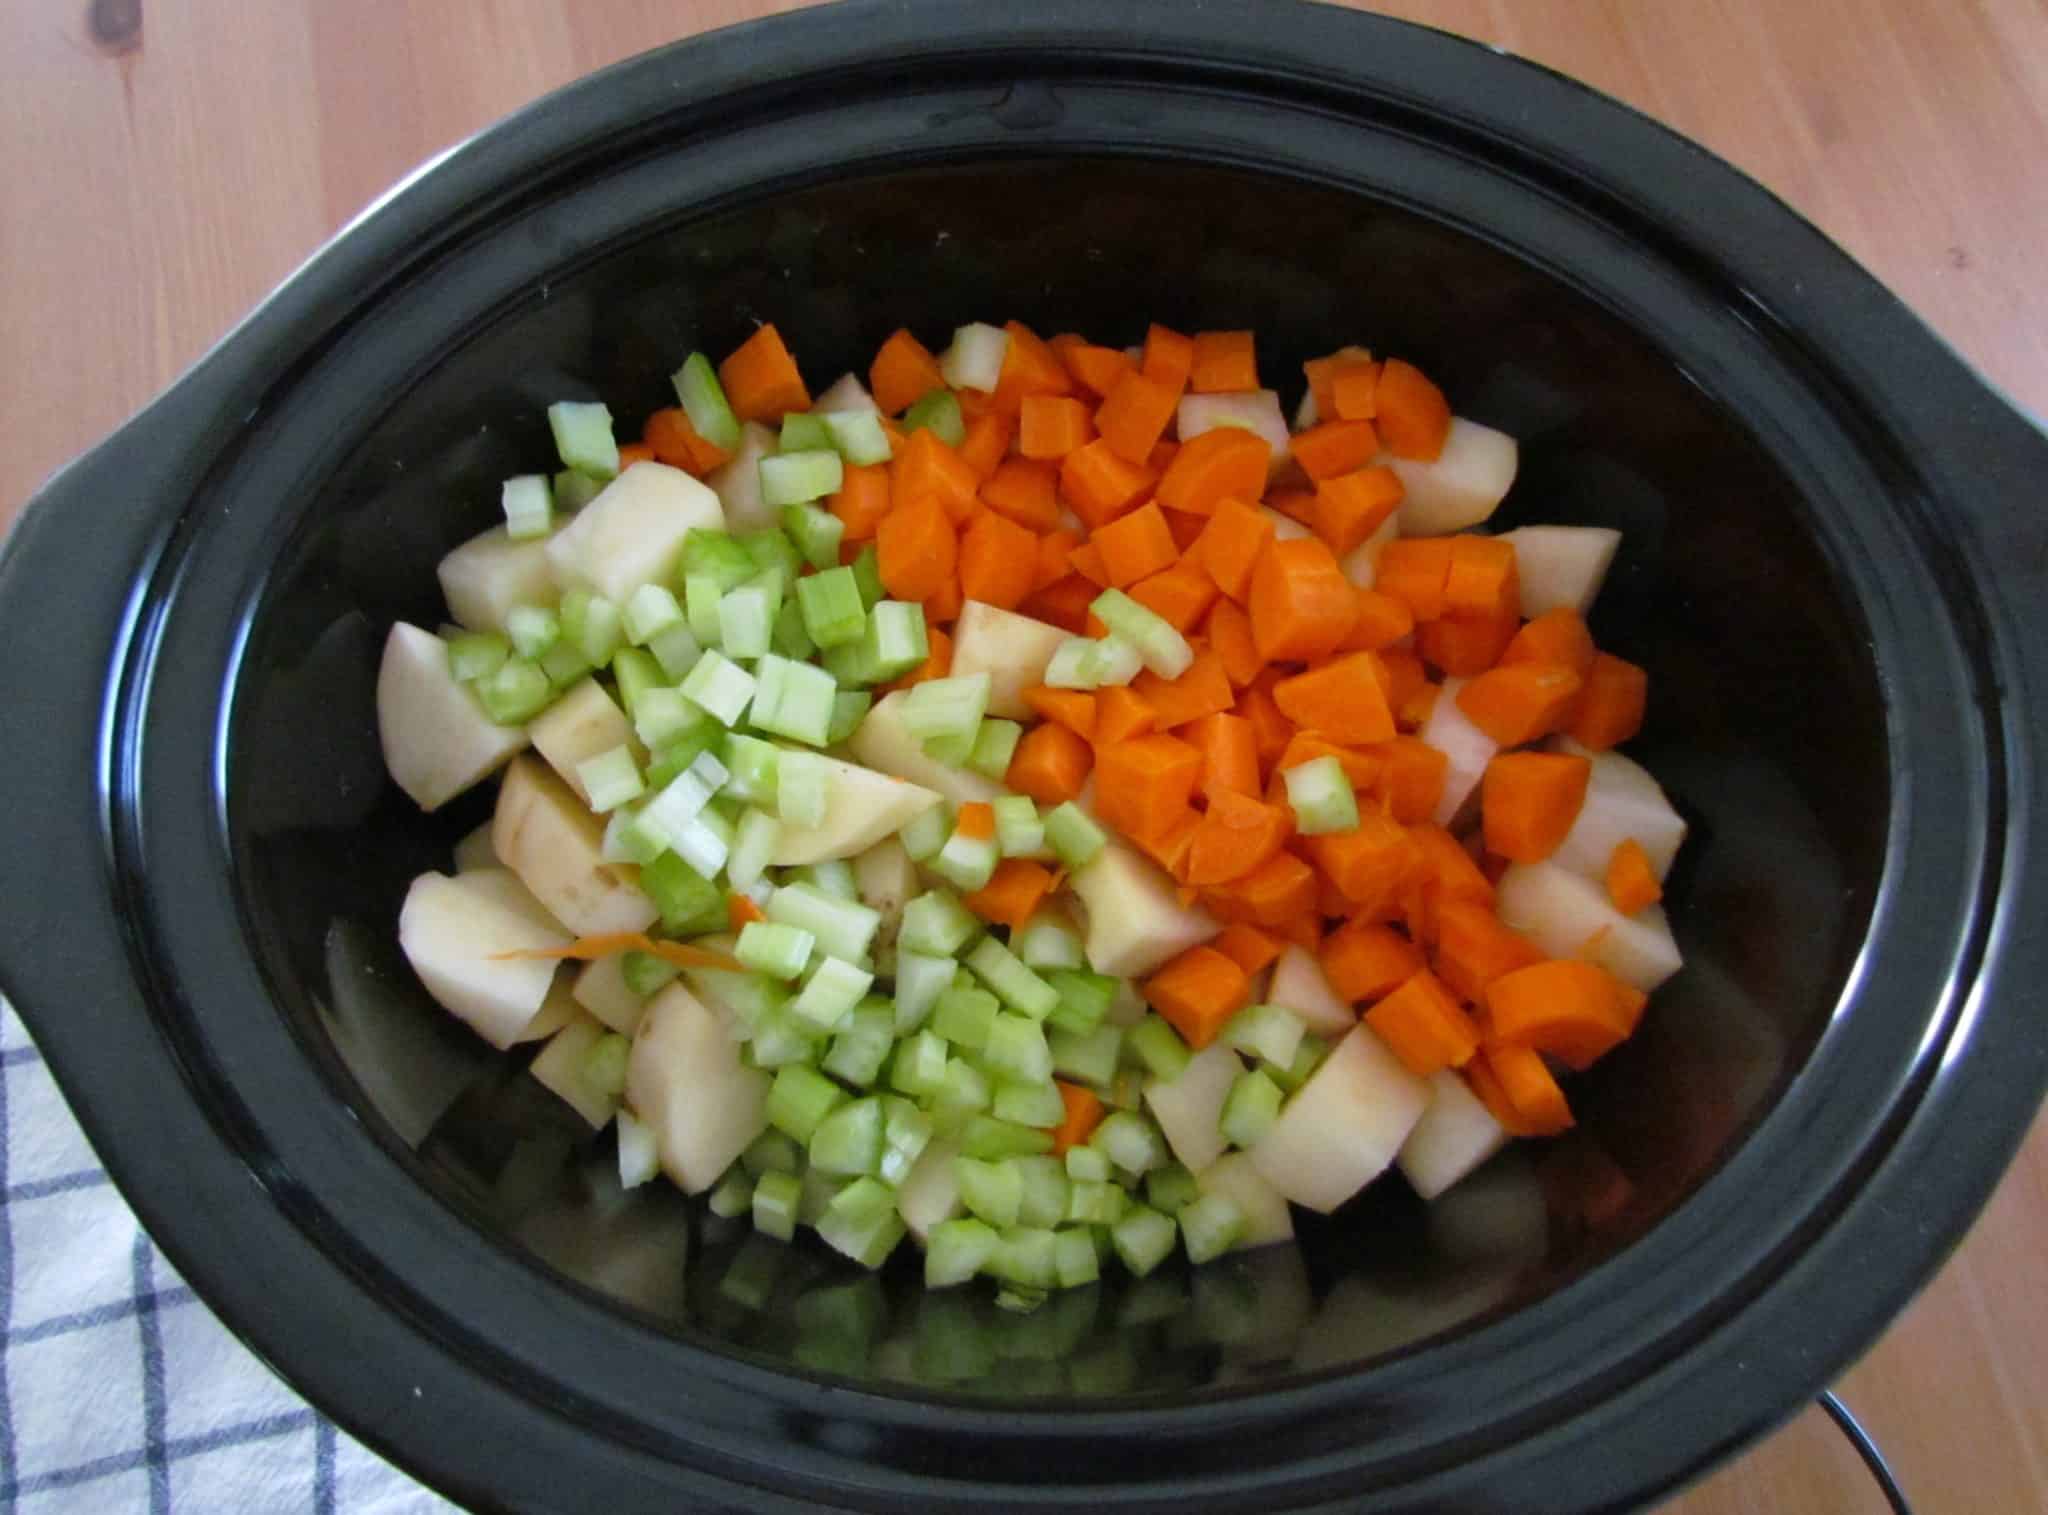 diced potatoes, diced celery, diced carrots, sliced leeks and cooked bacon.